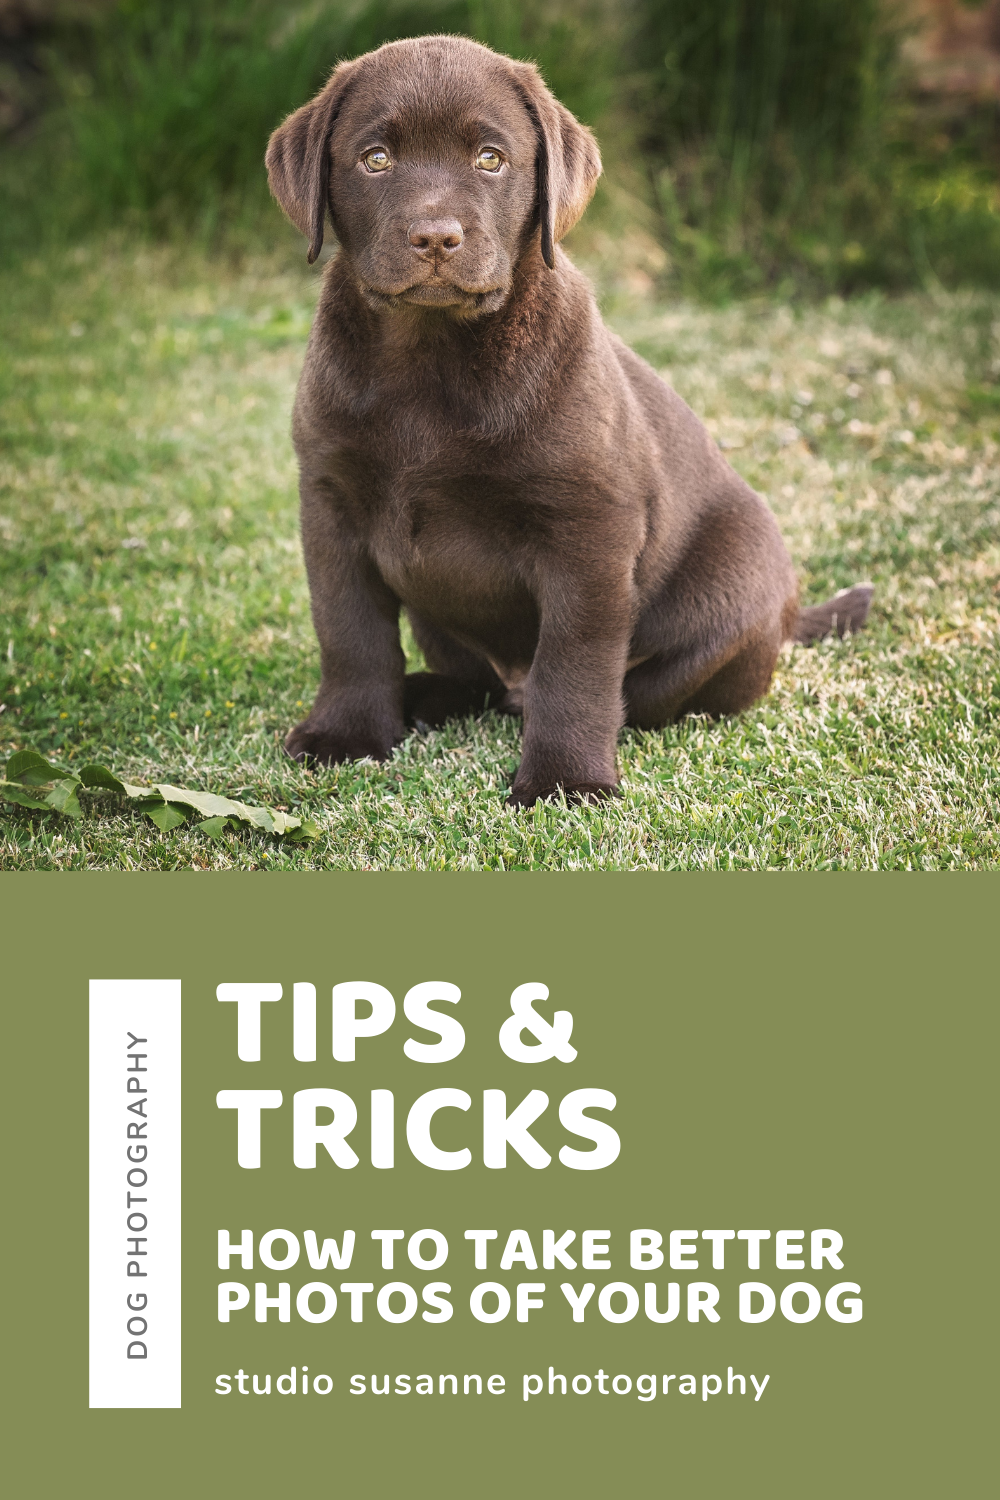 Tips & tricks_ How to take better photos of your dog photo